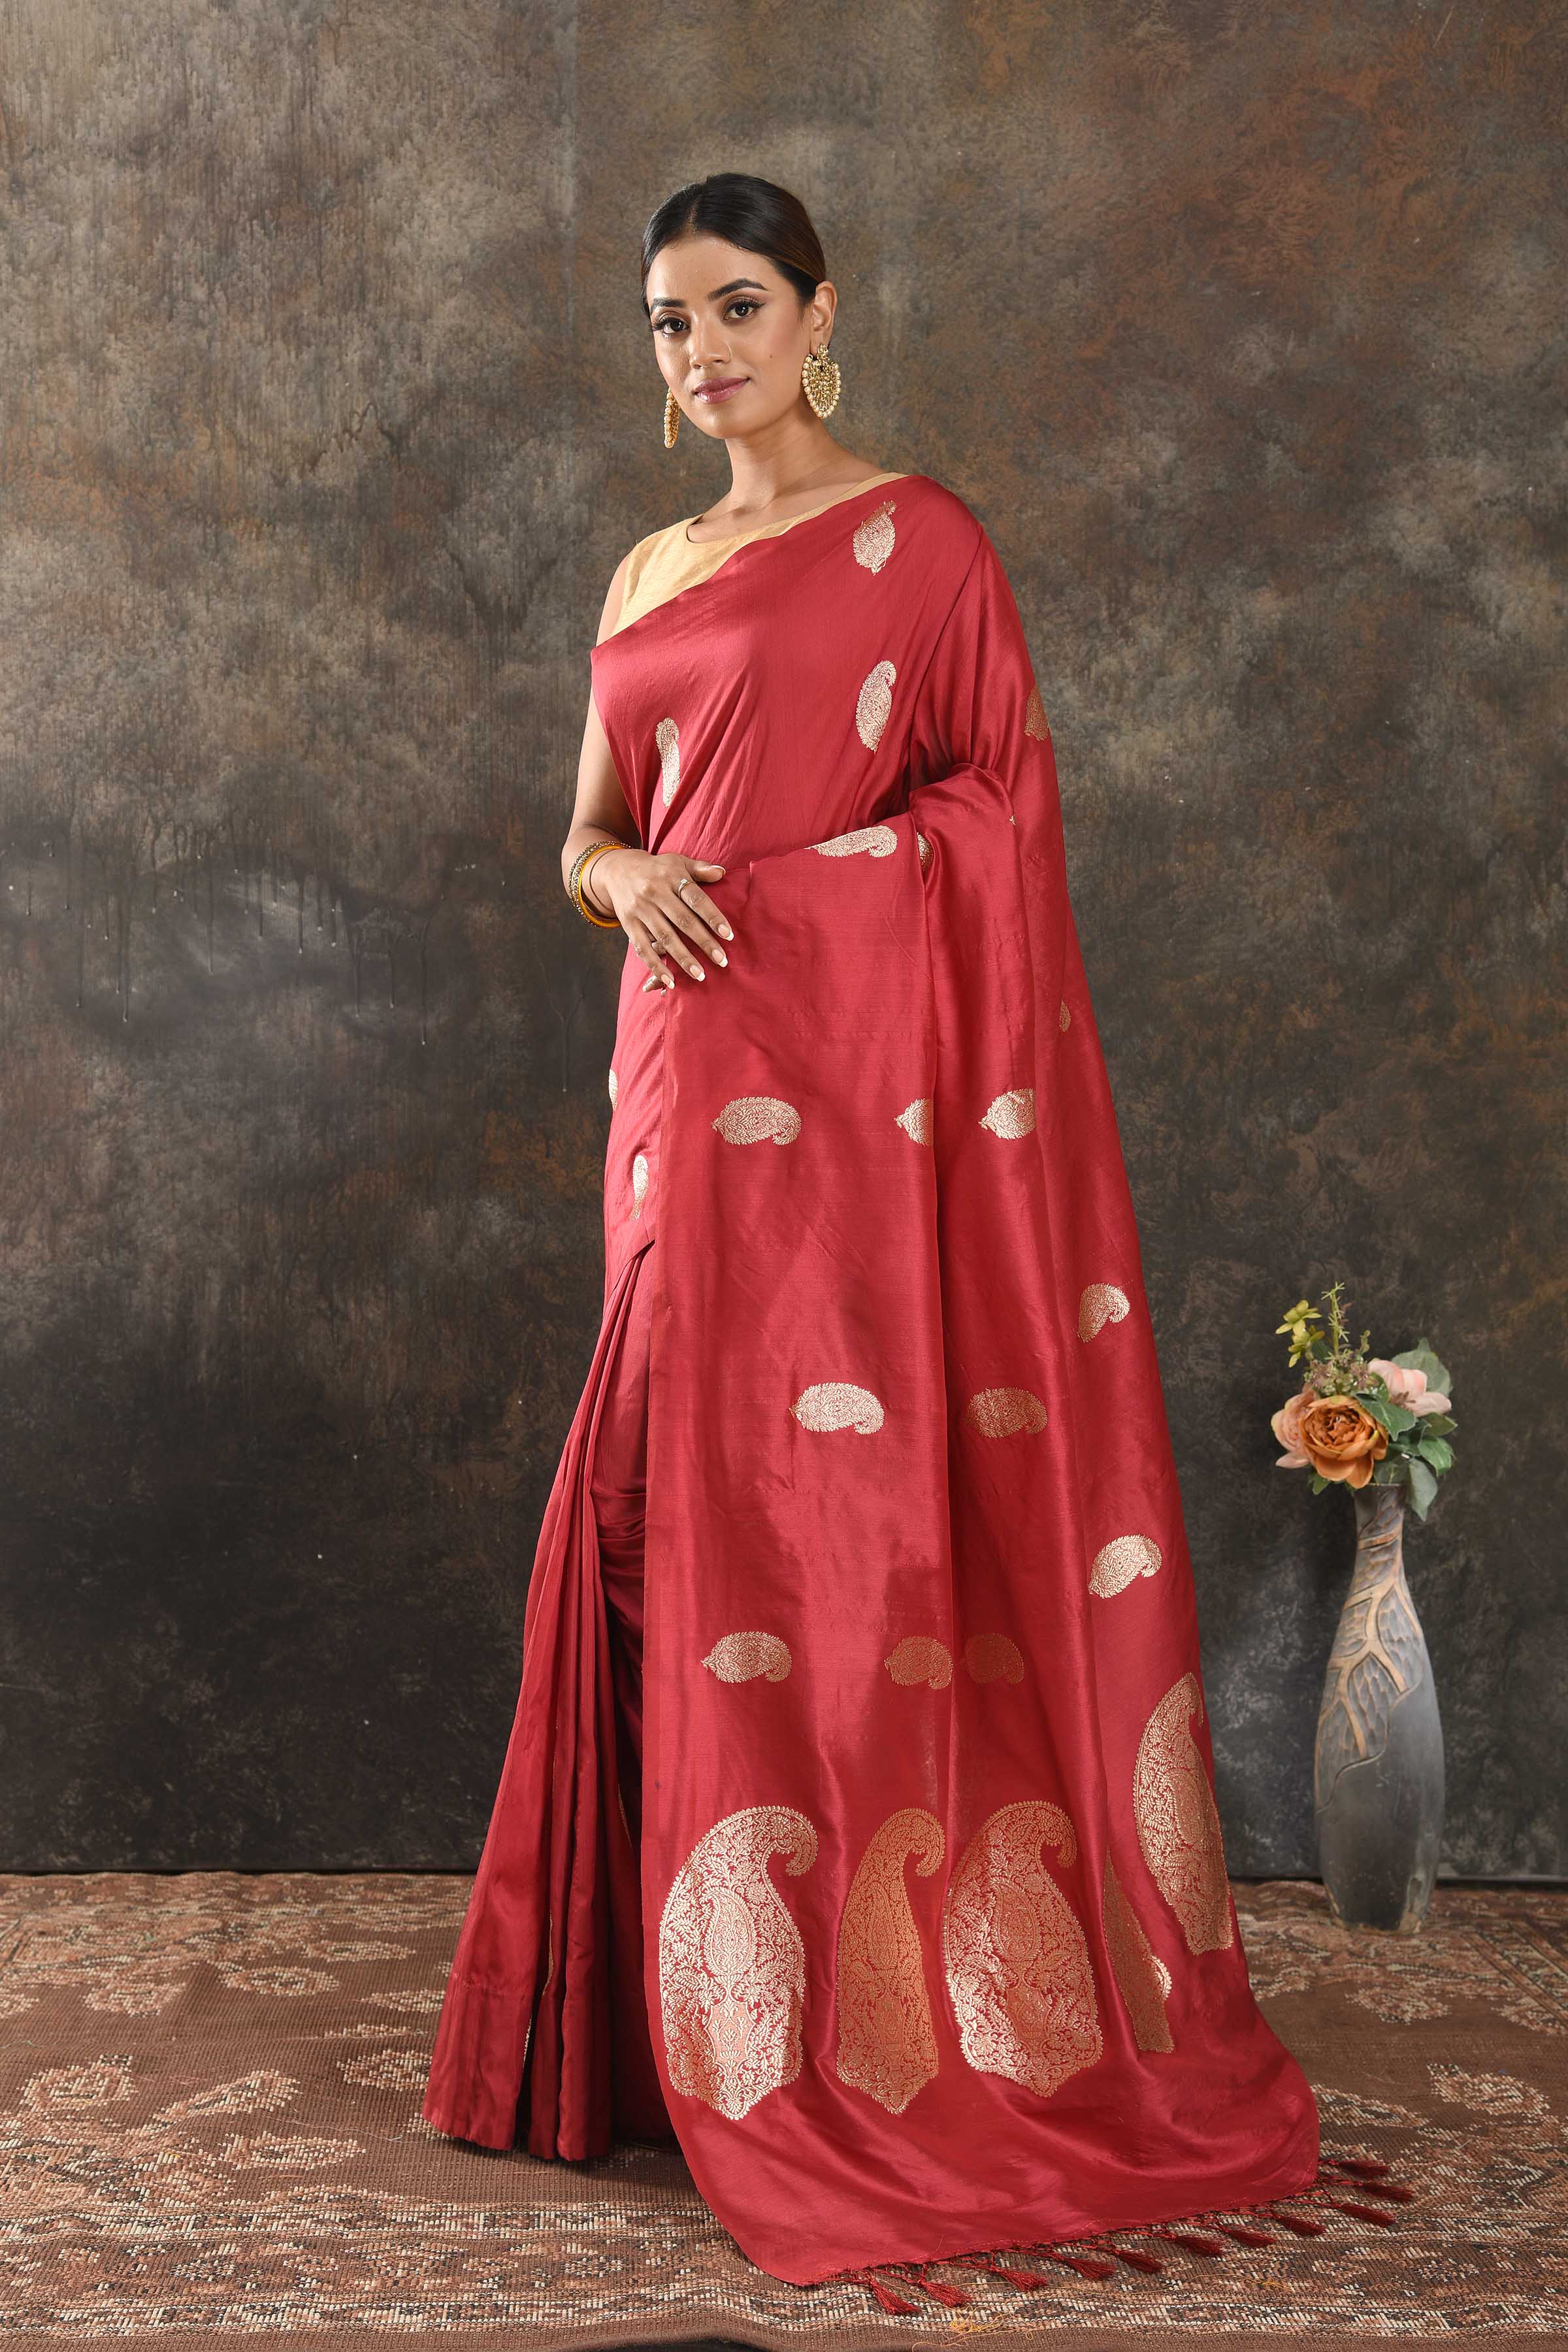 Buy beautiful red silk saree online in USA with silver zari paisley buta. Be vision of elegance on special occasions in exquisite designer sarees, handwoven sarees, georgette sarees, embroidered sarees, Banarasi sarees from Pure Elegance Indian saree store in USA.-pallu